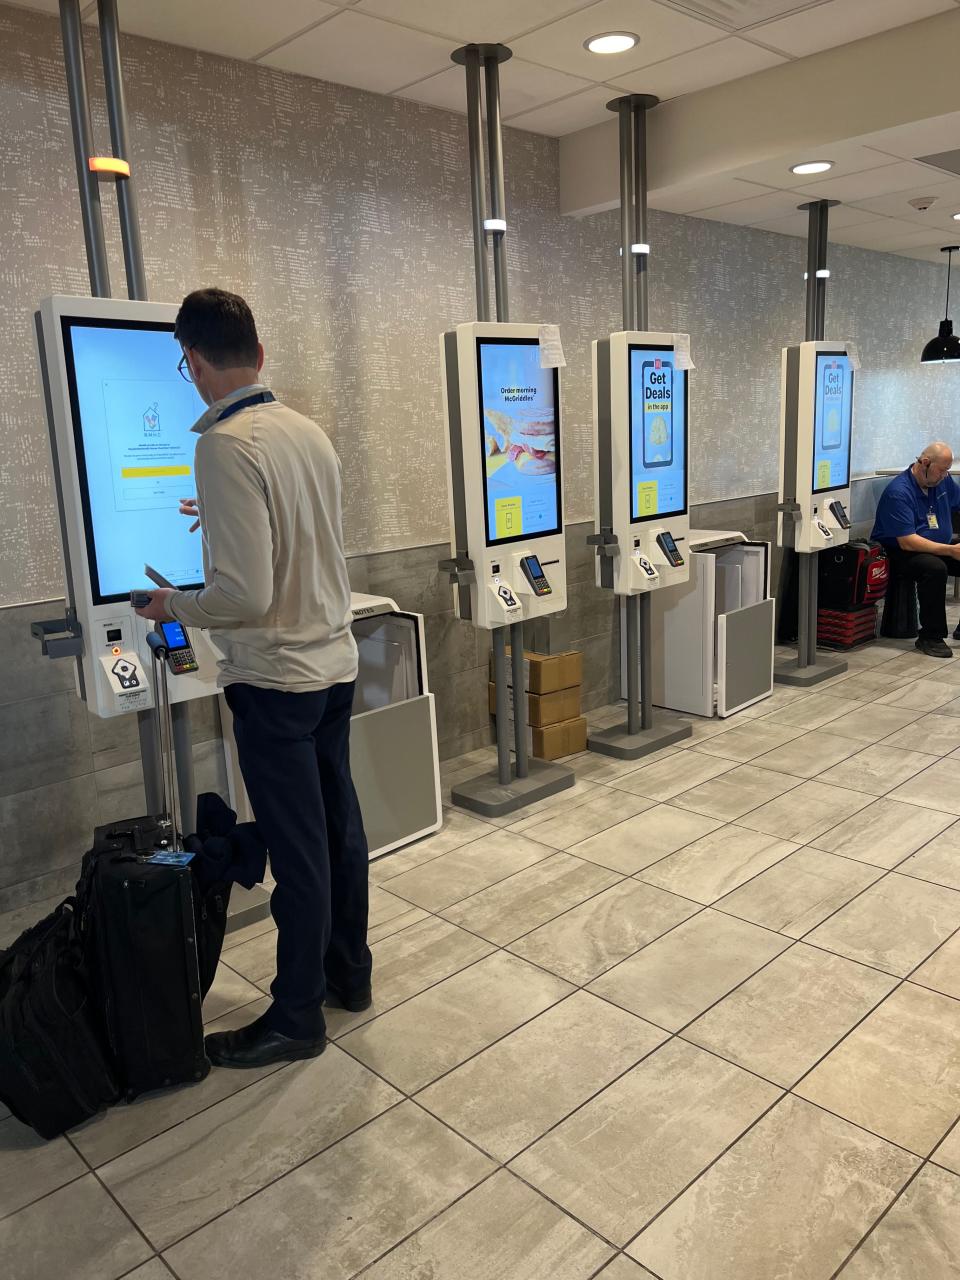 Screens have taken over at the McDonald's in the Minneapolis-Saint Paul airport.